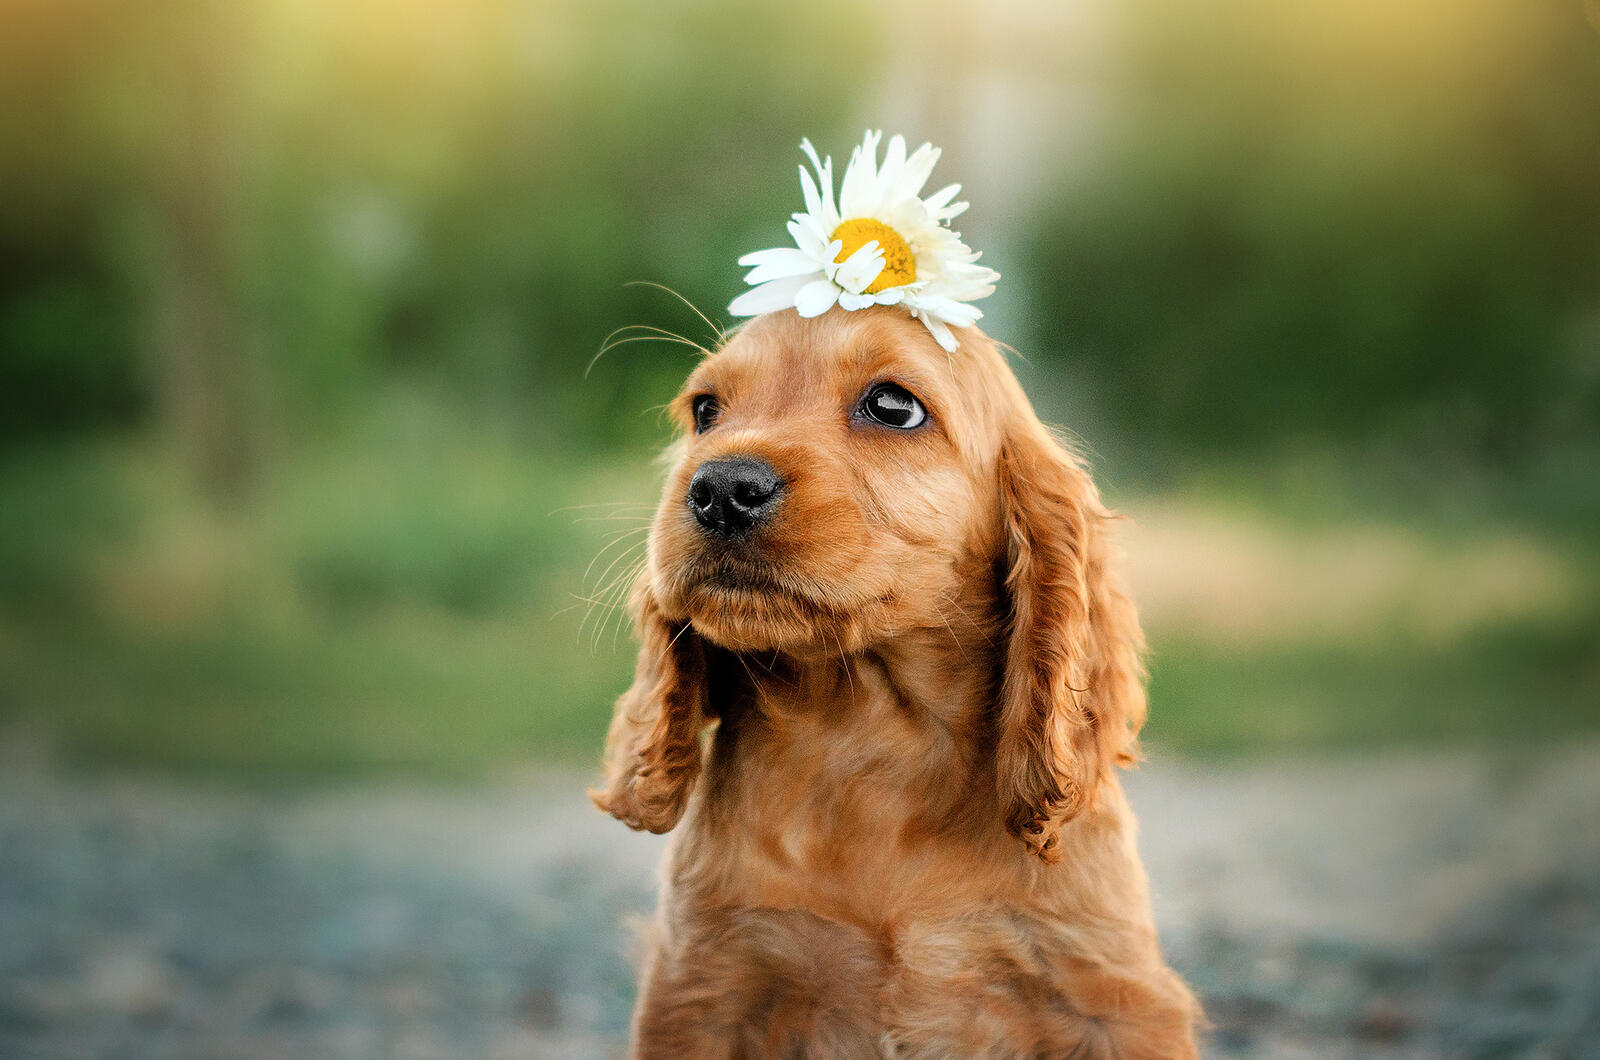 Free photo Puppy with daisies on her head